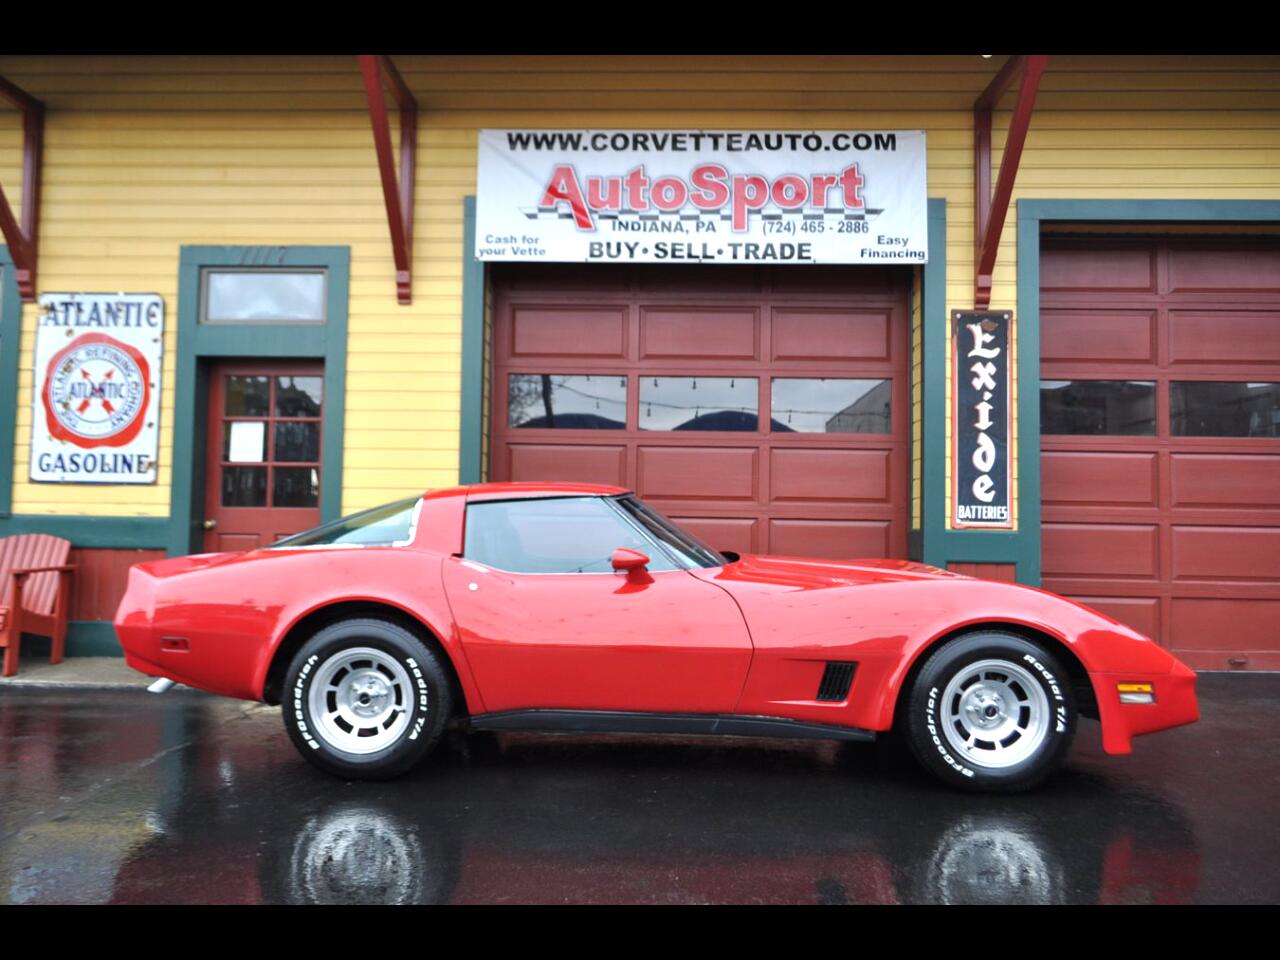 Details About 1981 Chevrolet Corvette Extremely Rare Colors Red Blue Interior